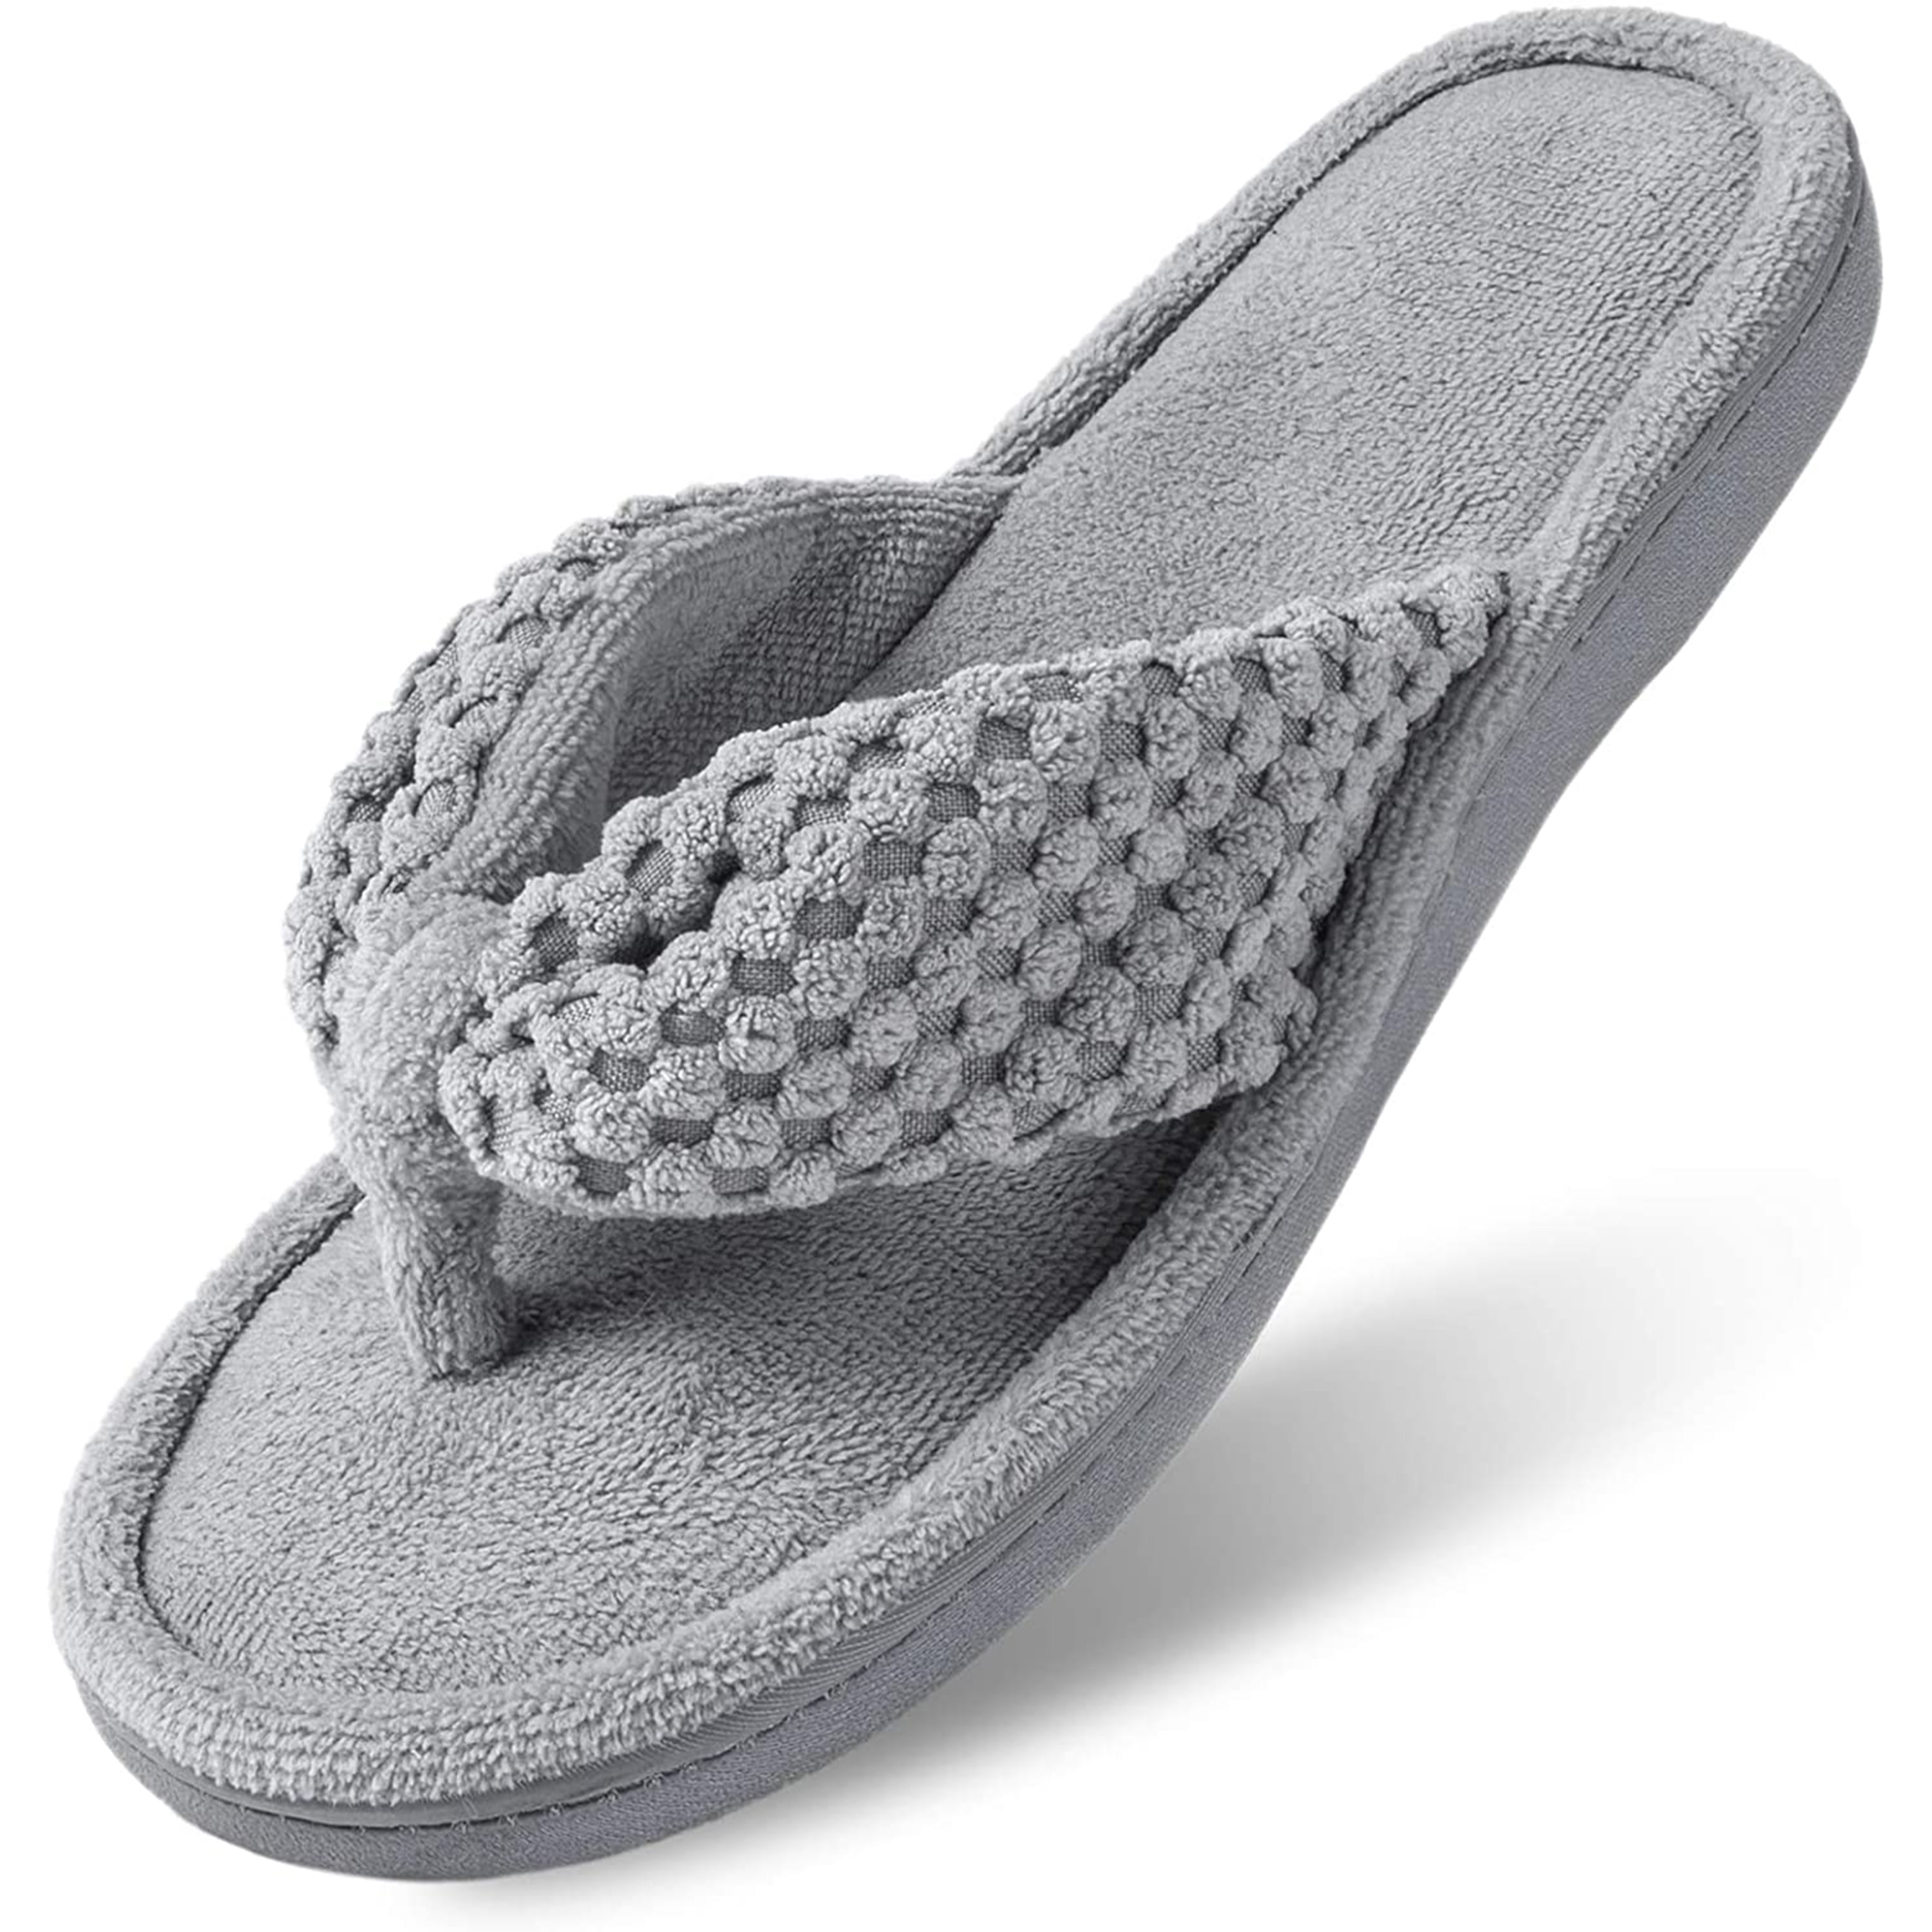 DODOING Women's Memory Foam Flip Flop House Indoor Slippers with Cozy Short  Plush Lining, Spa Thong Sandals Slippersm, Black/ Grey/ Pink 